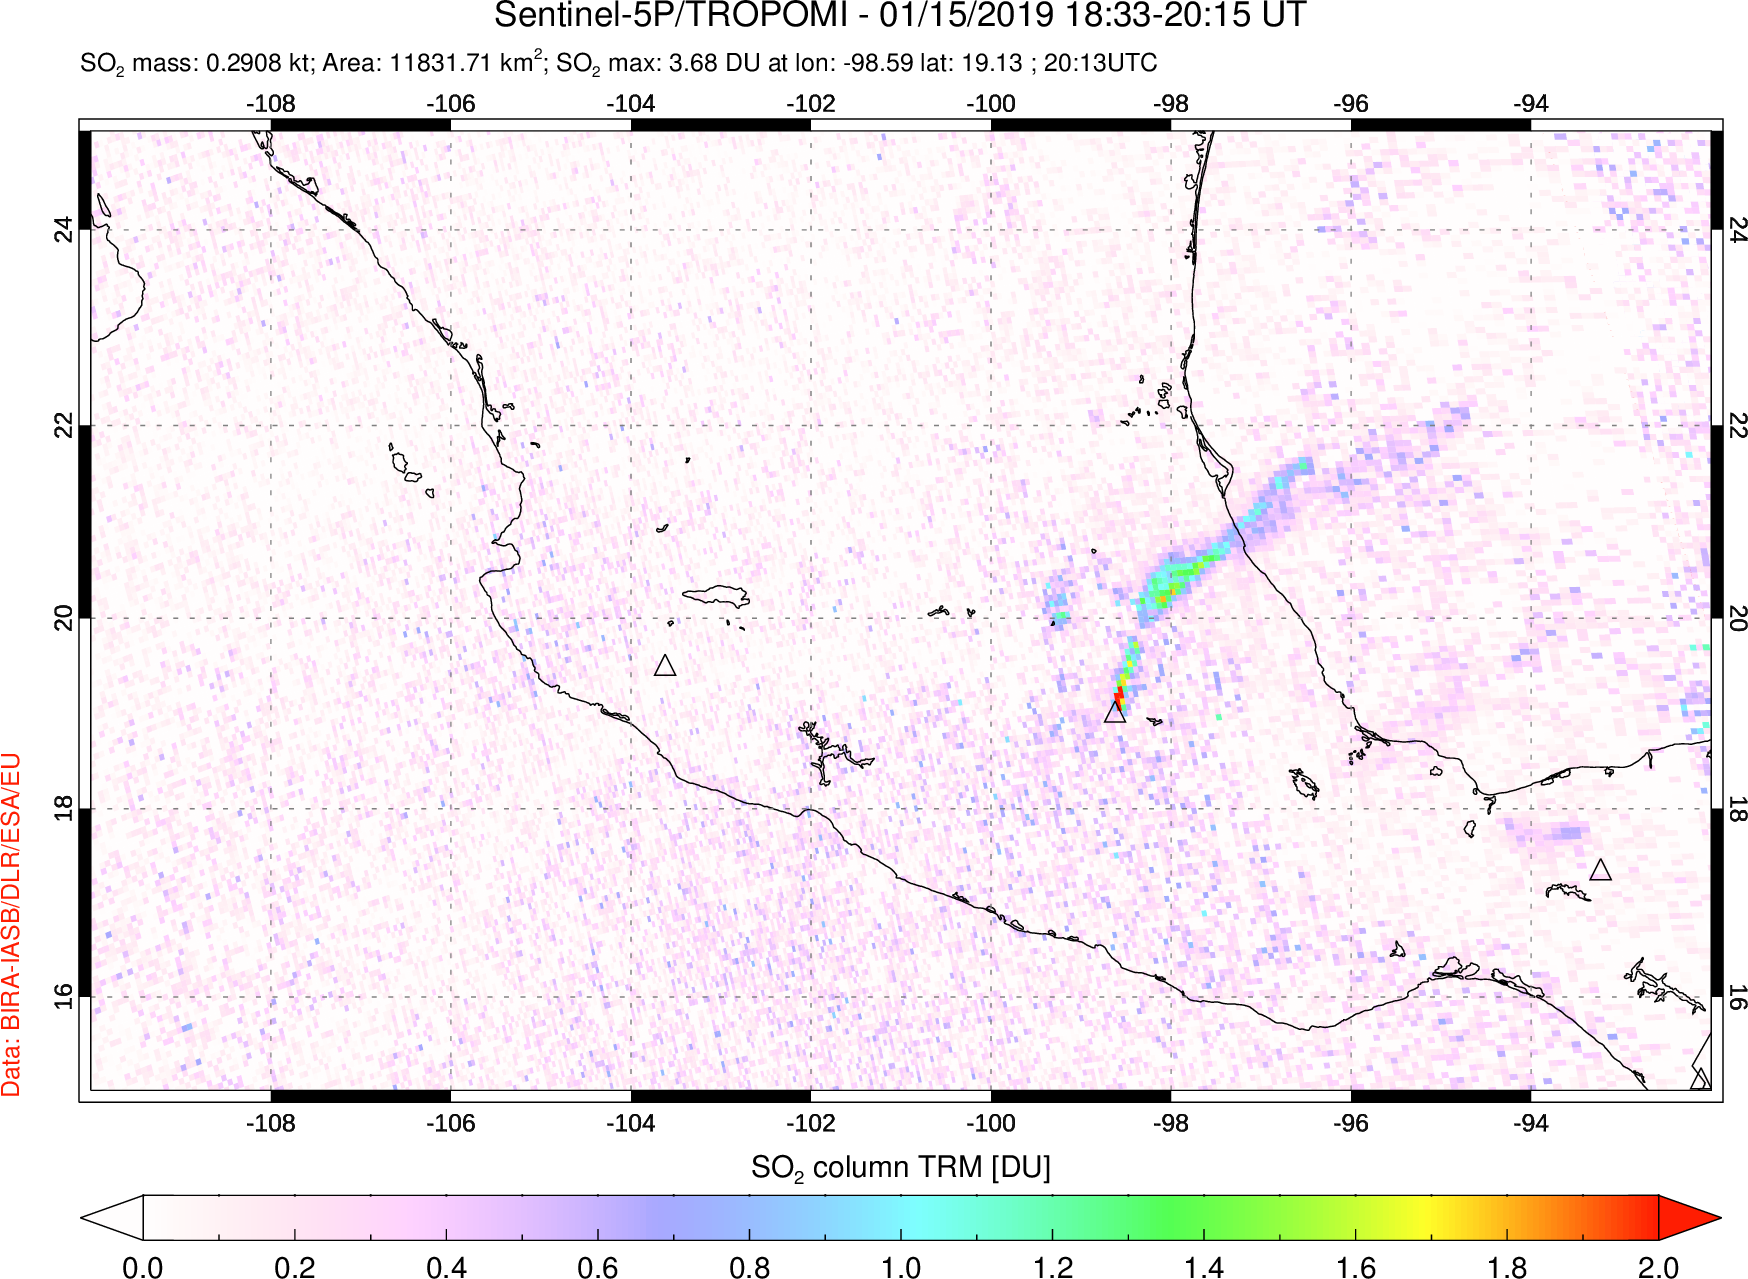 A sulfur dioxide image over Mexico on Jan 15, 2019.